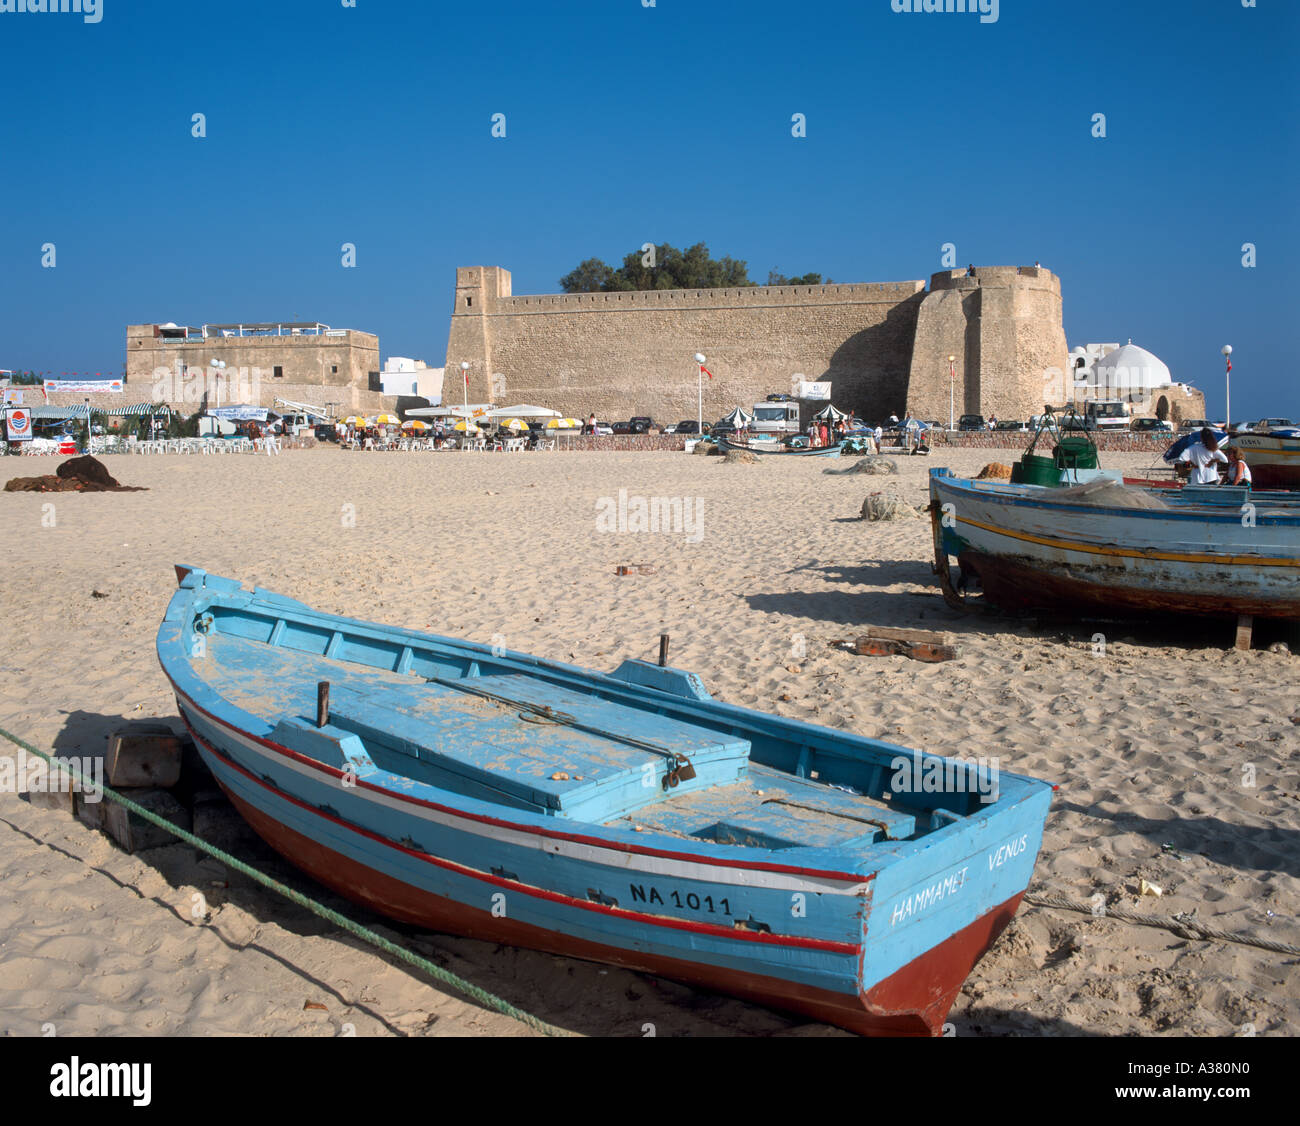 Old Fort from the town beach, Hammamet, Tunisia, North Africa Stock Photo